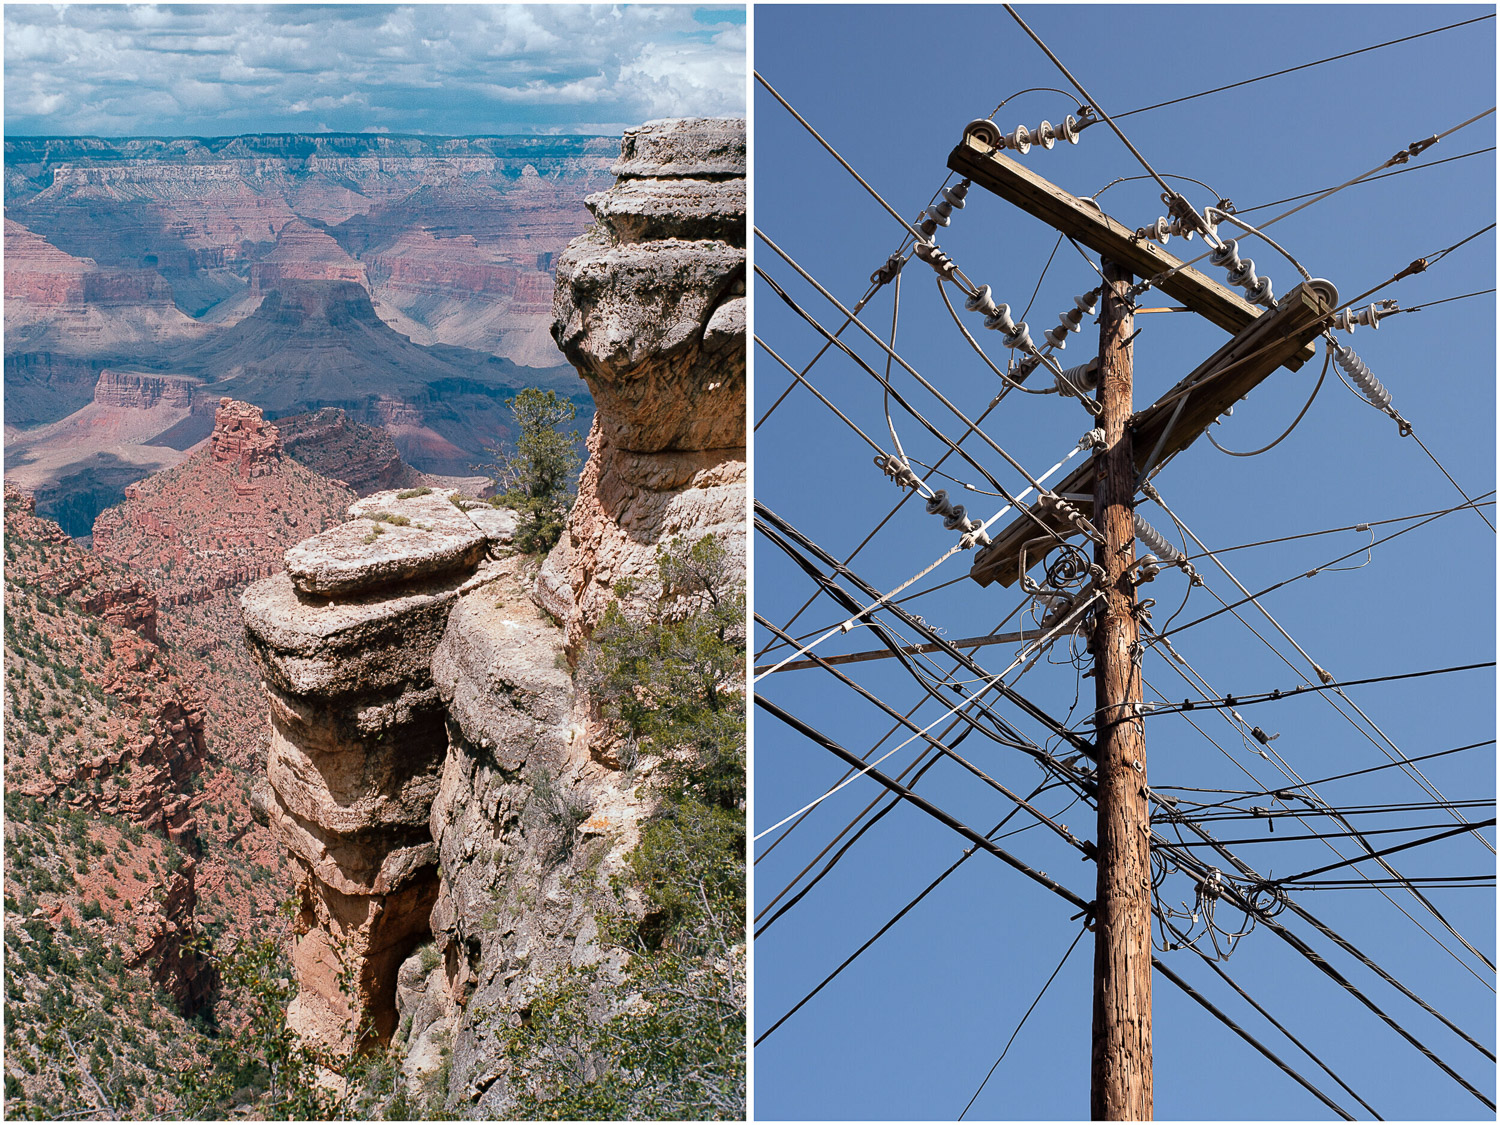 Left photograph is the Grand Canyon. Right photograph is a utility pole.